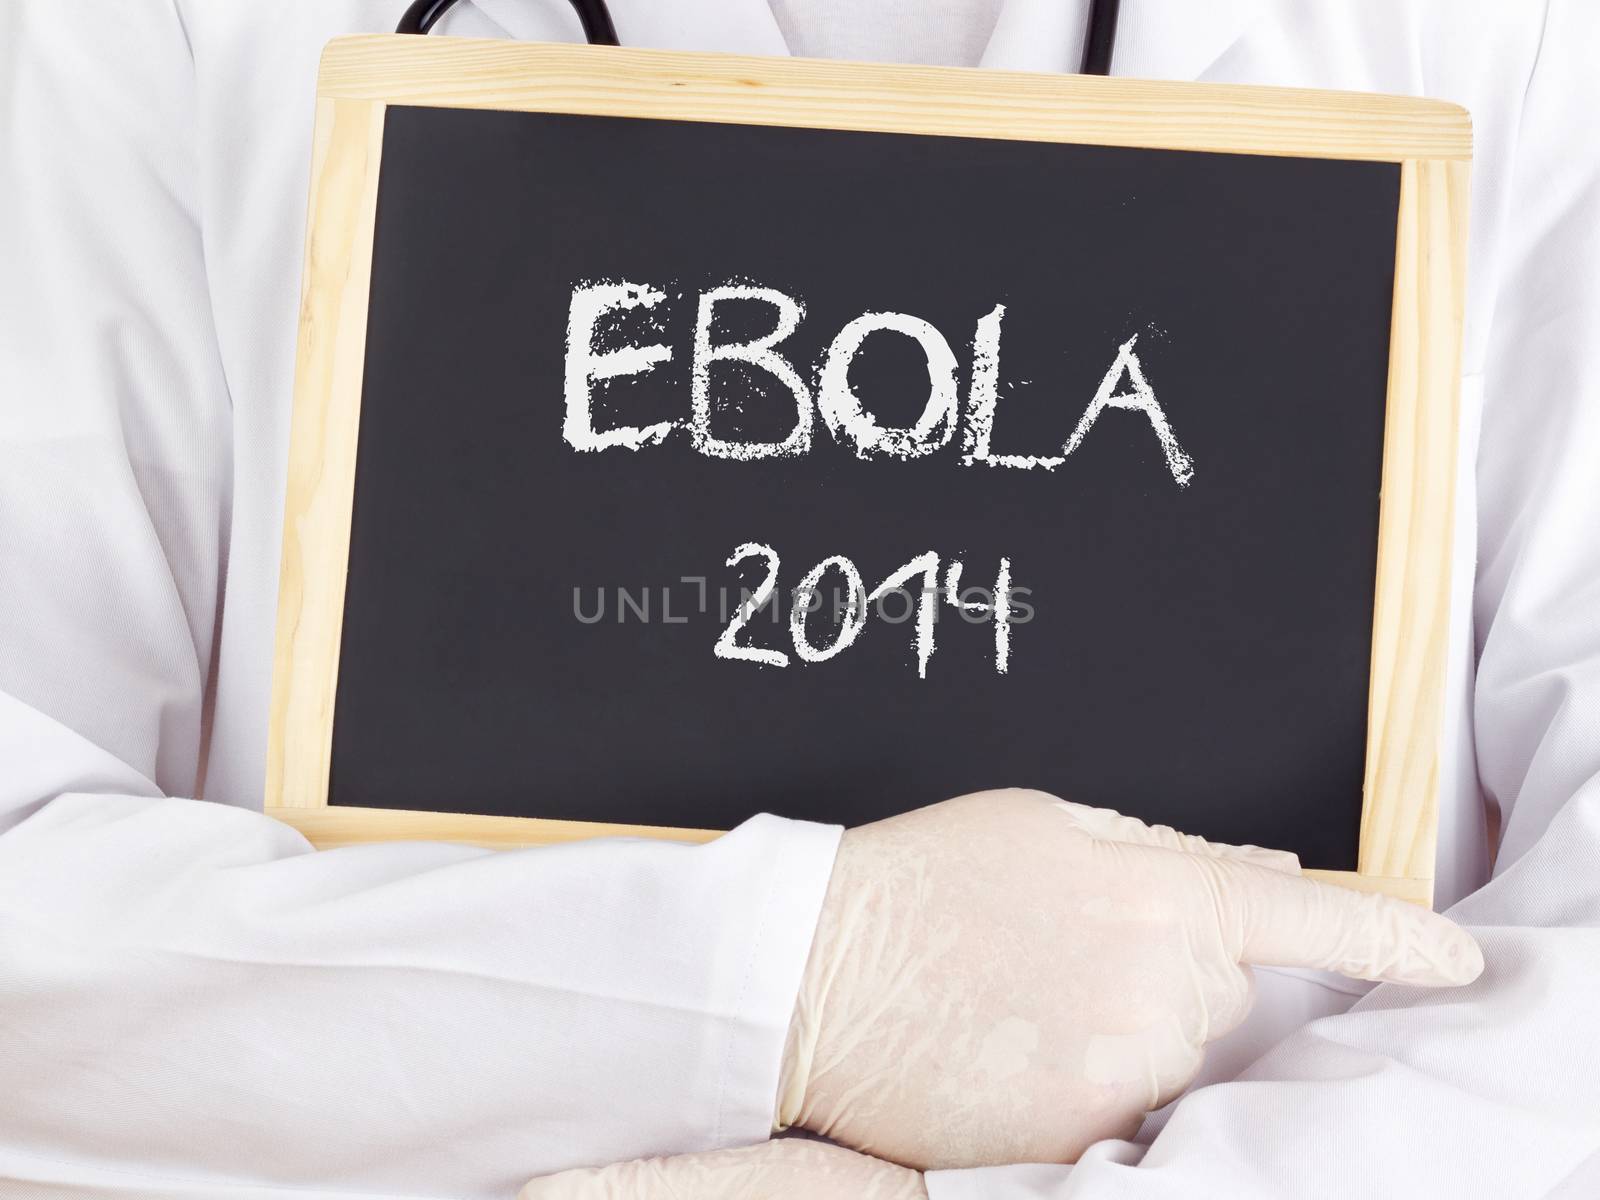 Doctor shows information: Ebola 2014 by gwolters